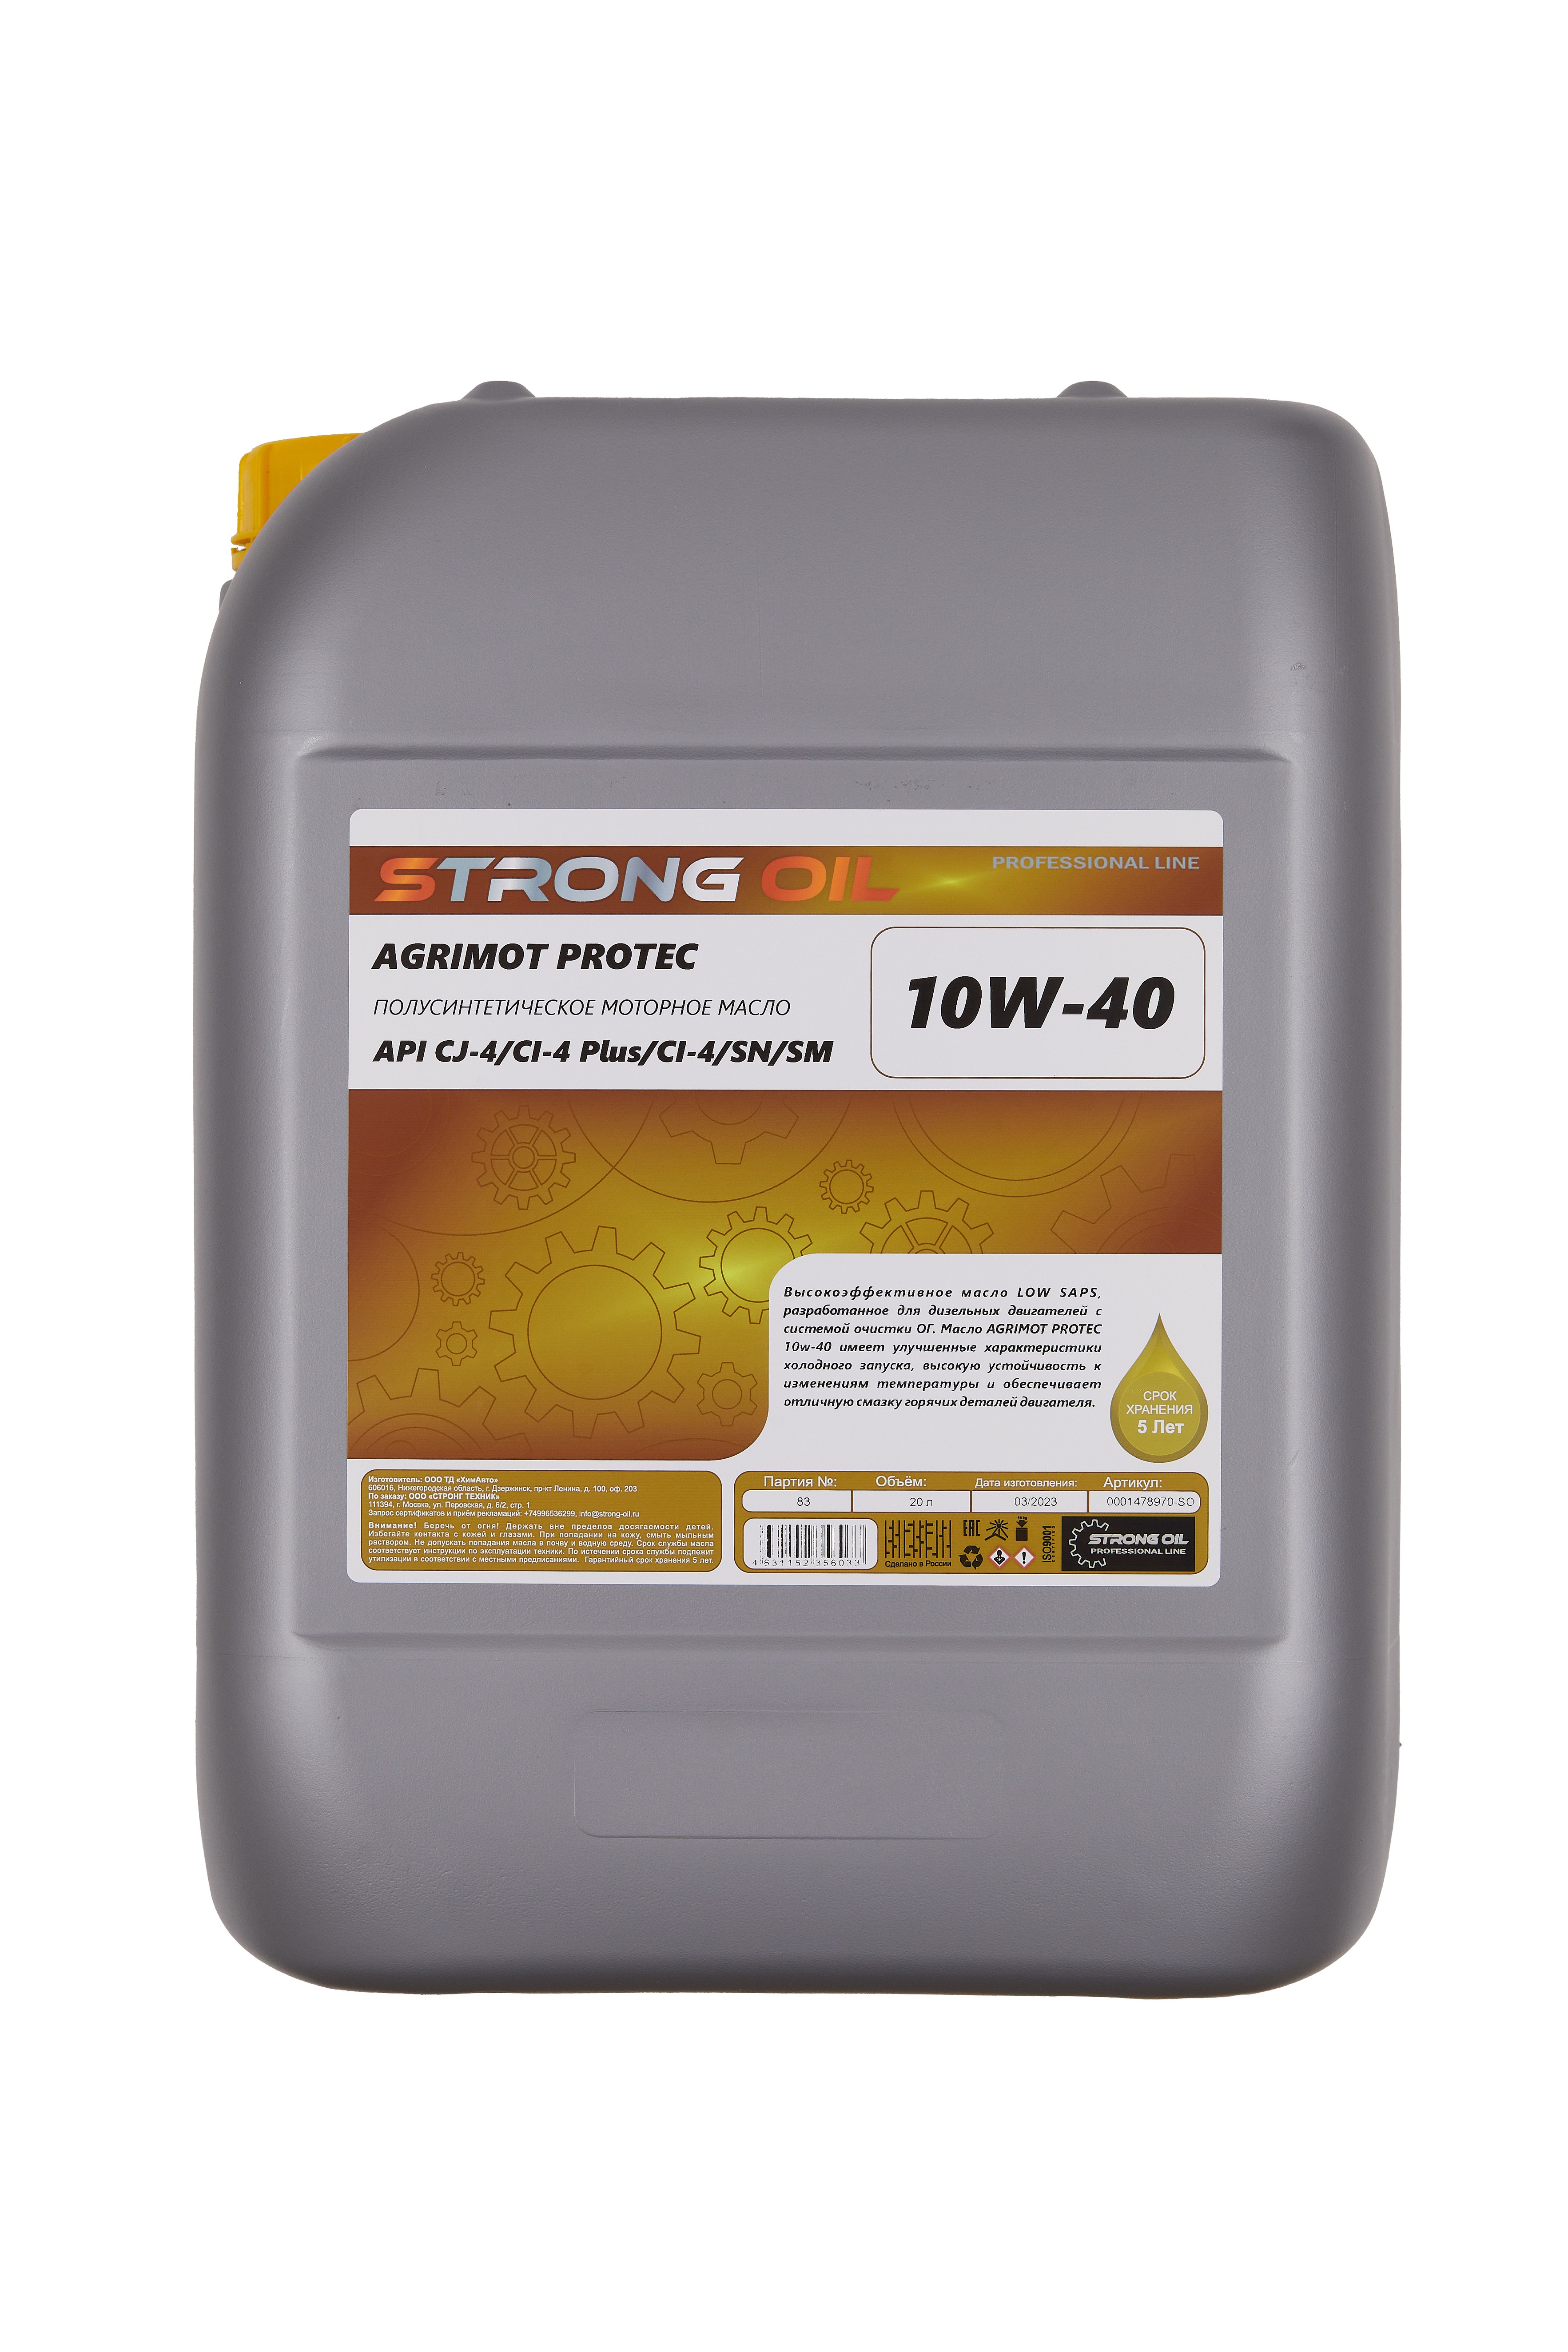 Масло моторное Agrimot Protec 10W-40 STRONG OIL